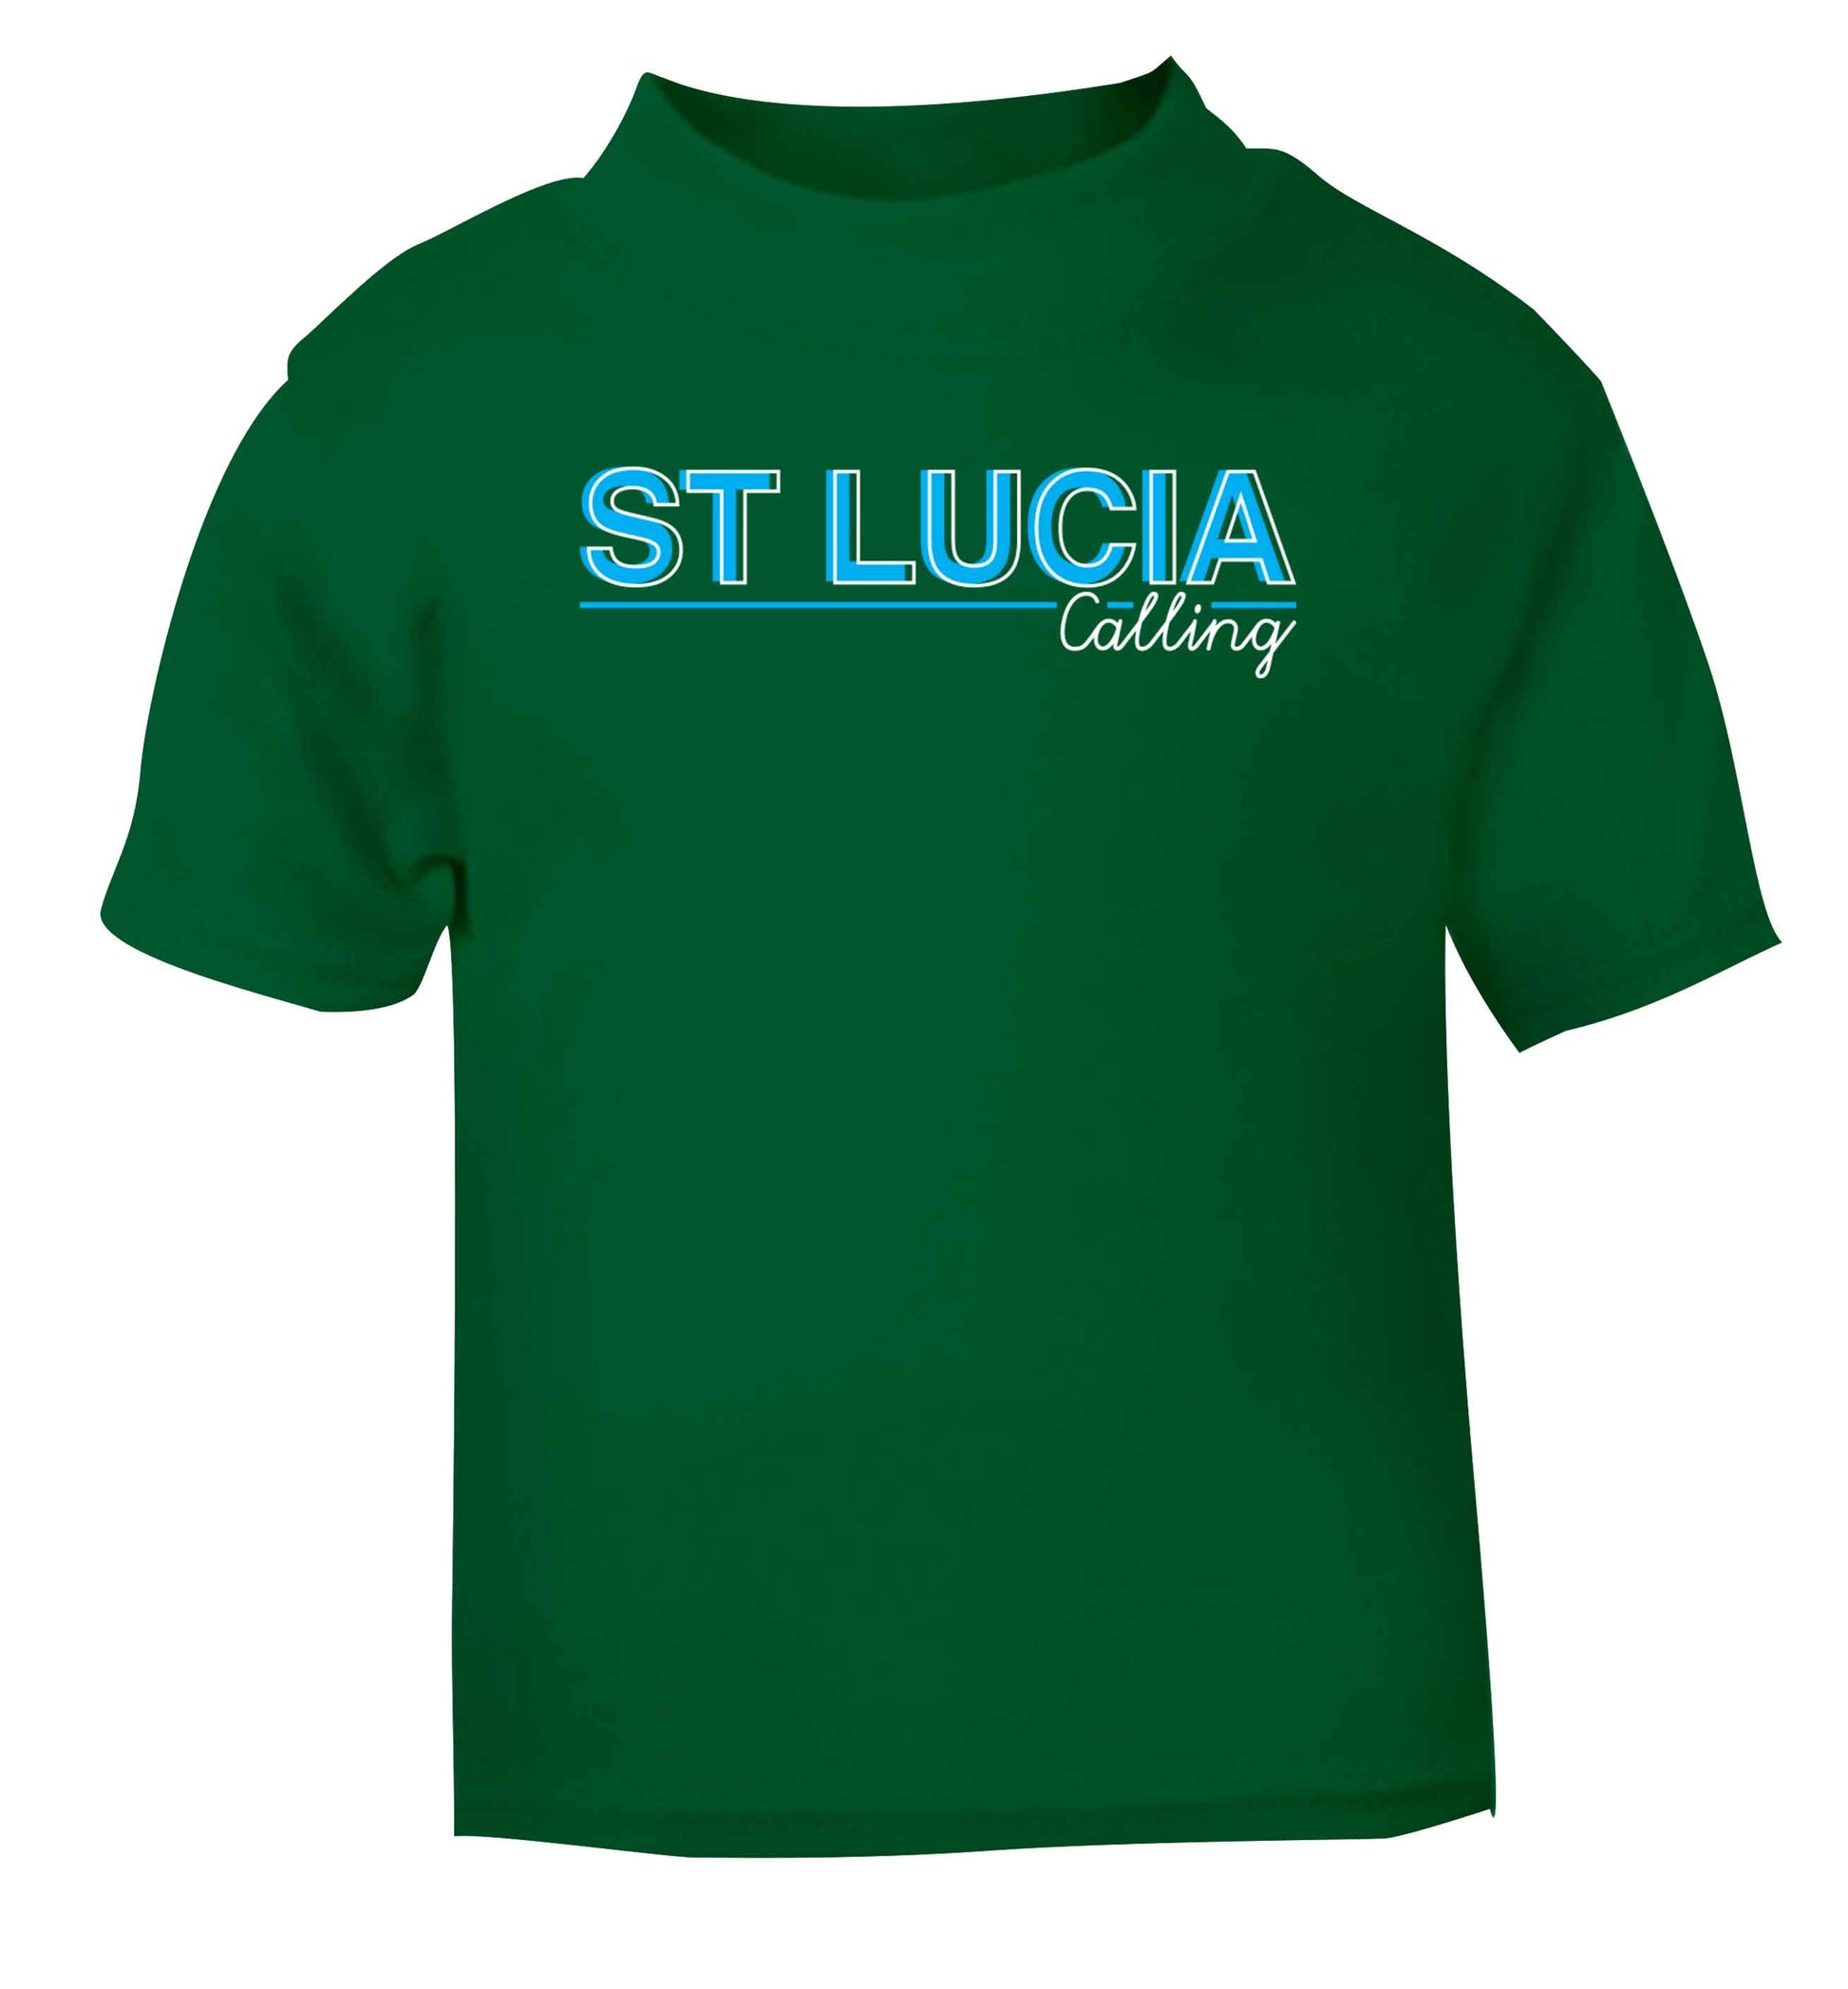 St Lucia calling green Baby Toddler Tshirt 2 Years